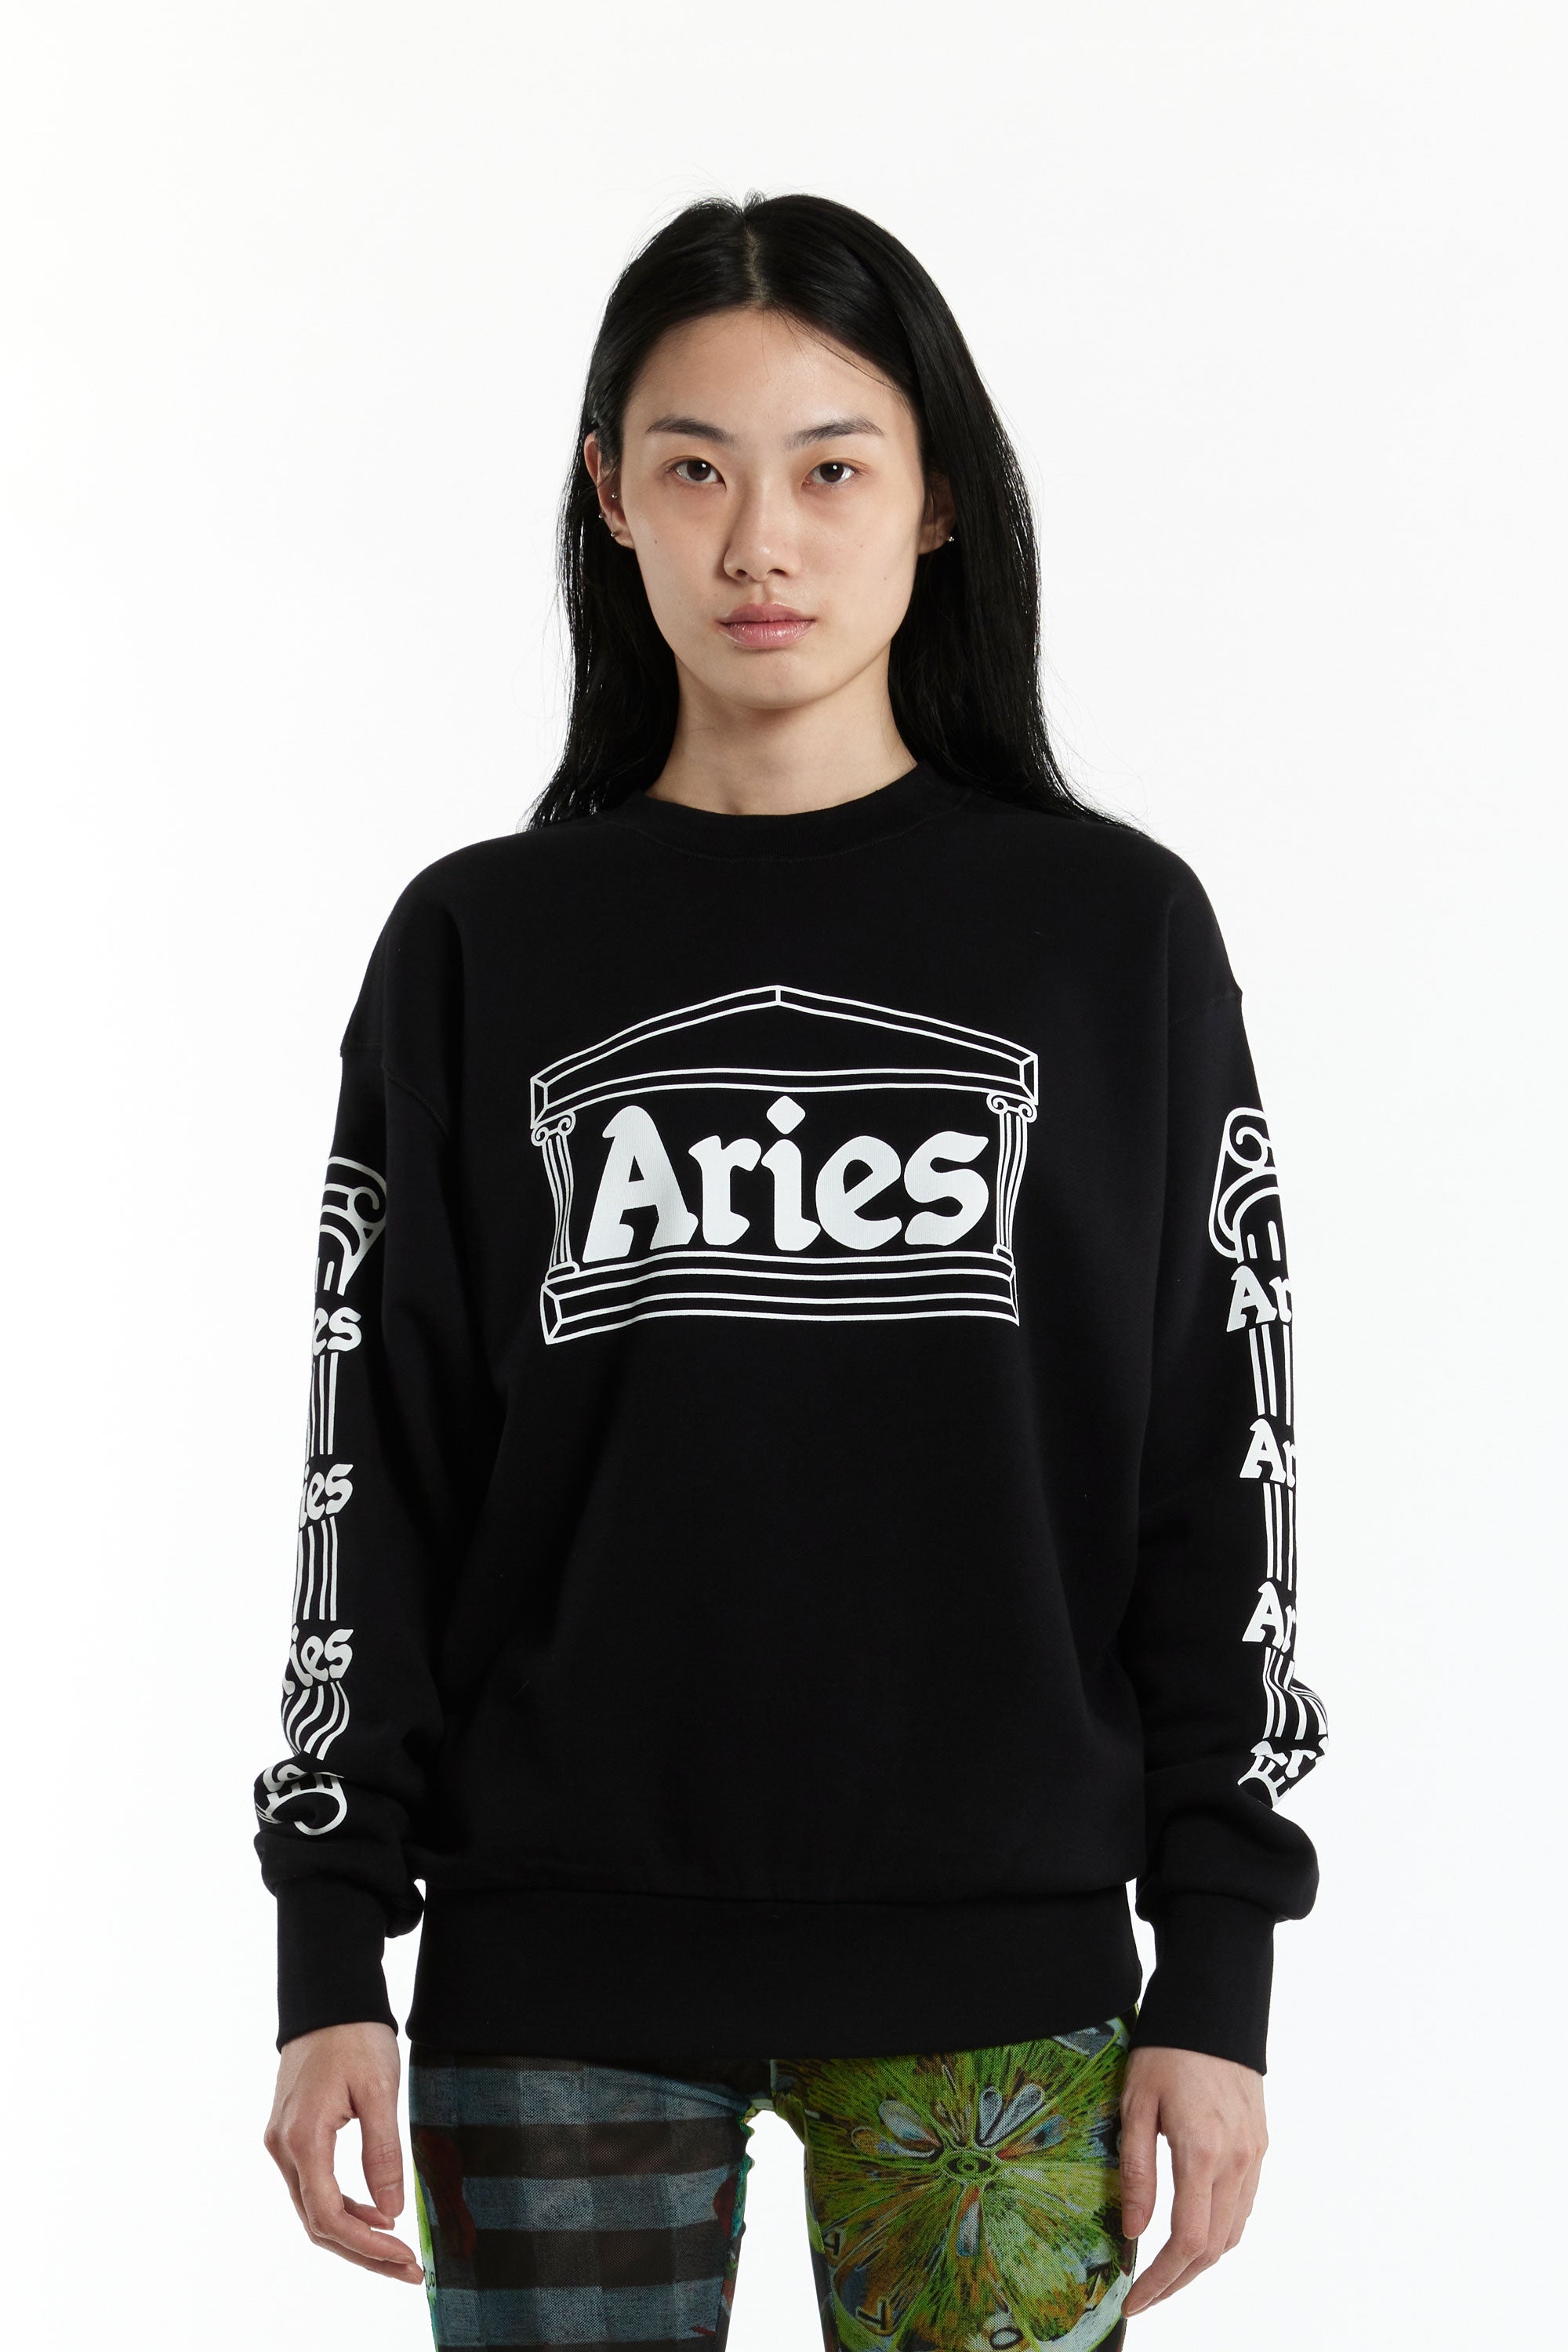 The ARIES - Column Sweatshirt SS23  available online with global shipping, and in PAM Stores Melbourne and Sydney.